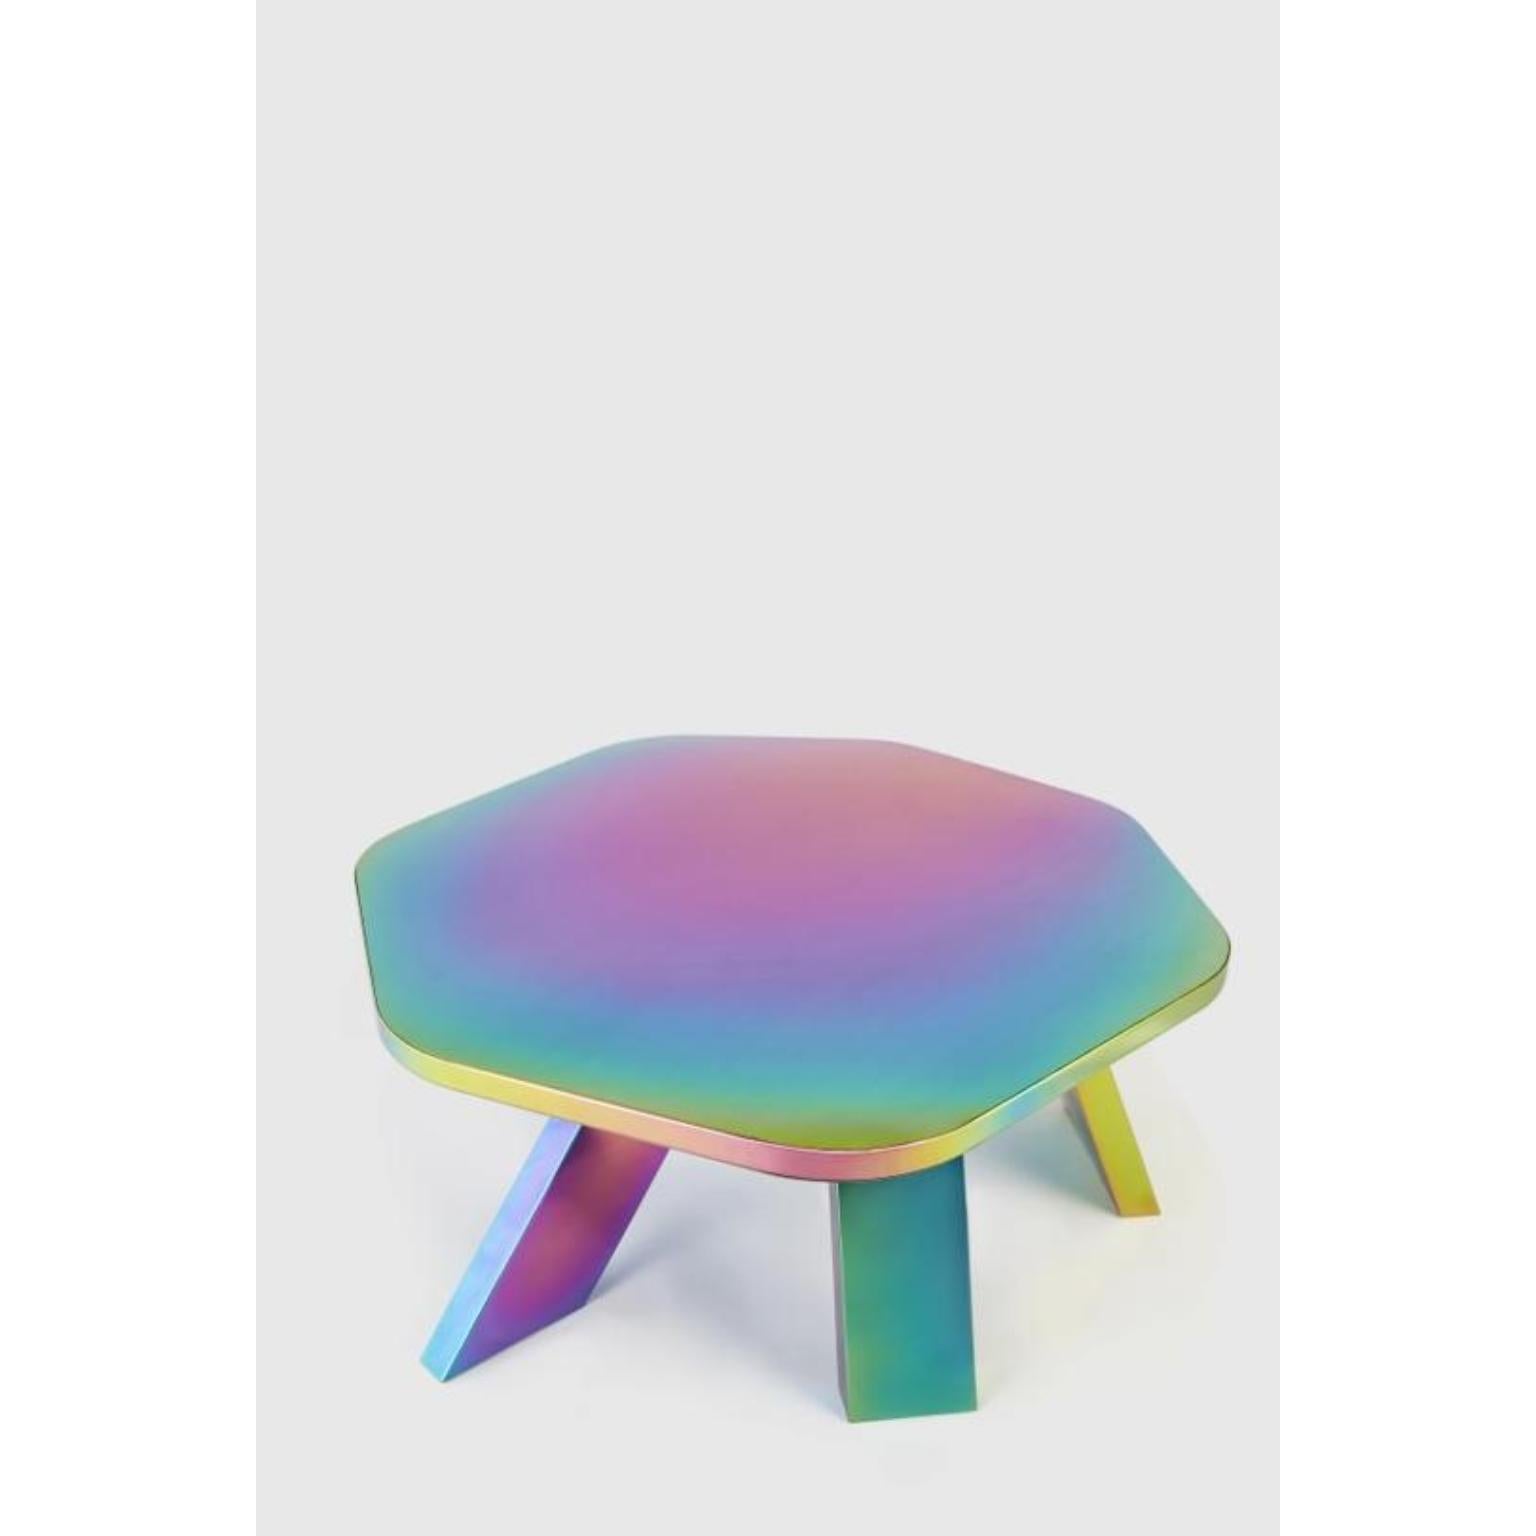 Rainbow center table by Hatsu
Dimensions: D 114 x W 127 x H 40 cm 
Materials: Plated stainless steel 

Hatsu is a design studio based in Mumbai that creates modern lighting that are unique and immediately recognisable. We started with an idea to